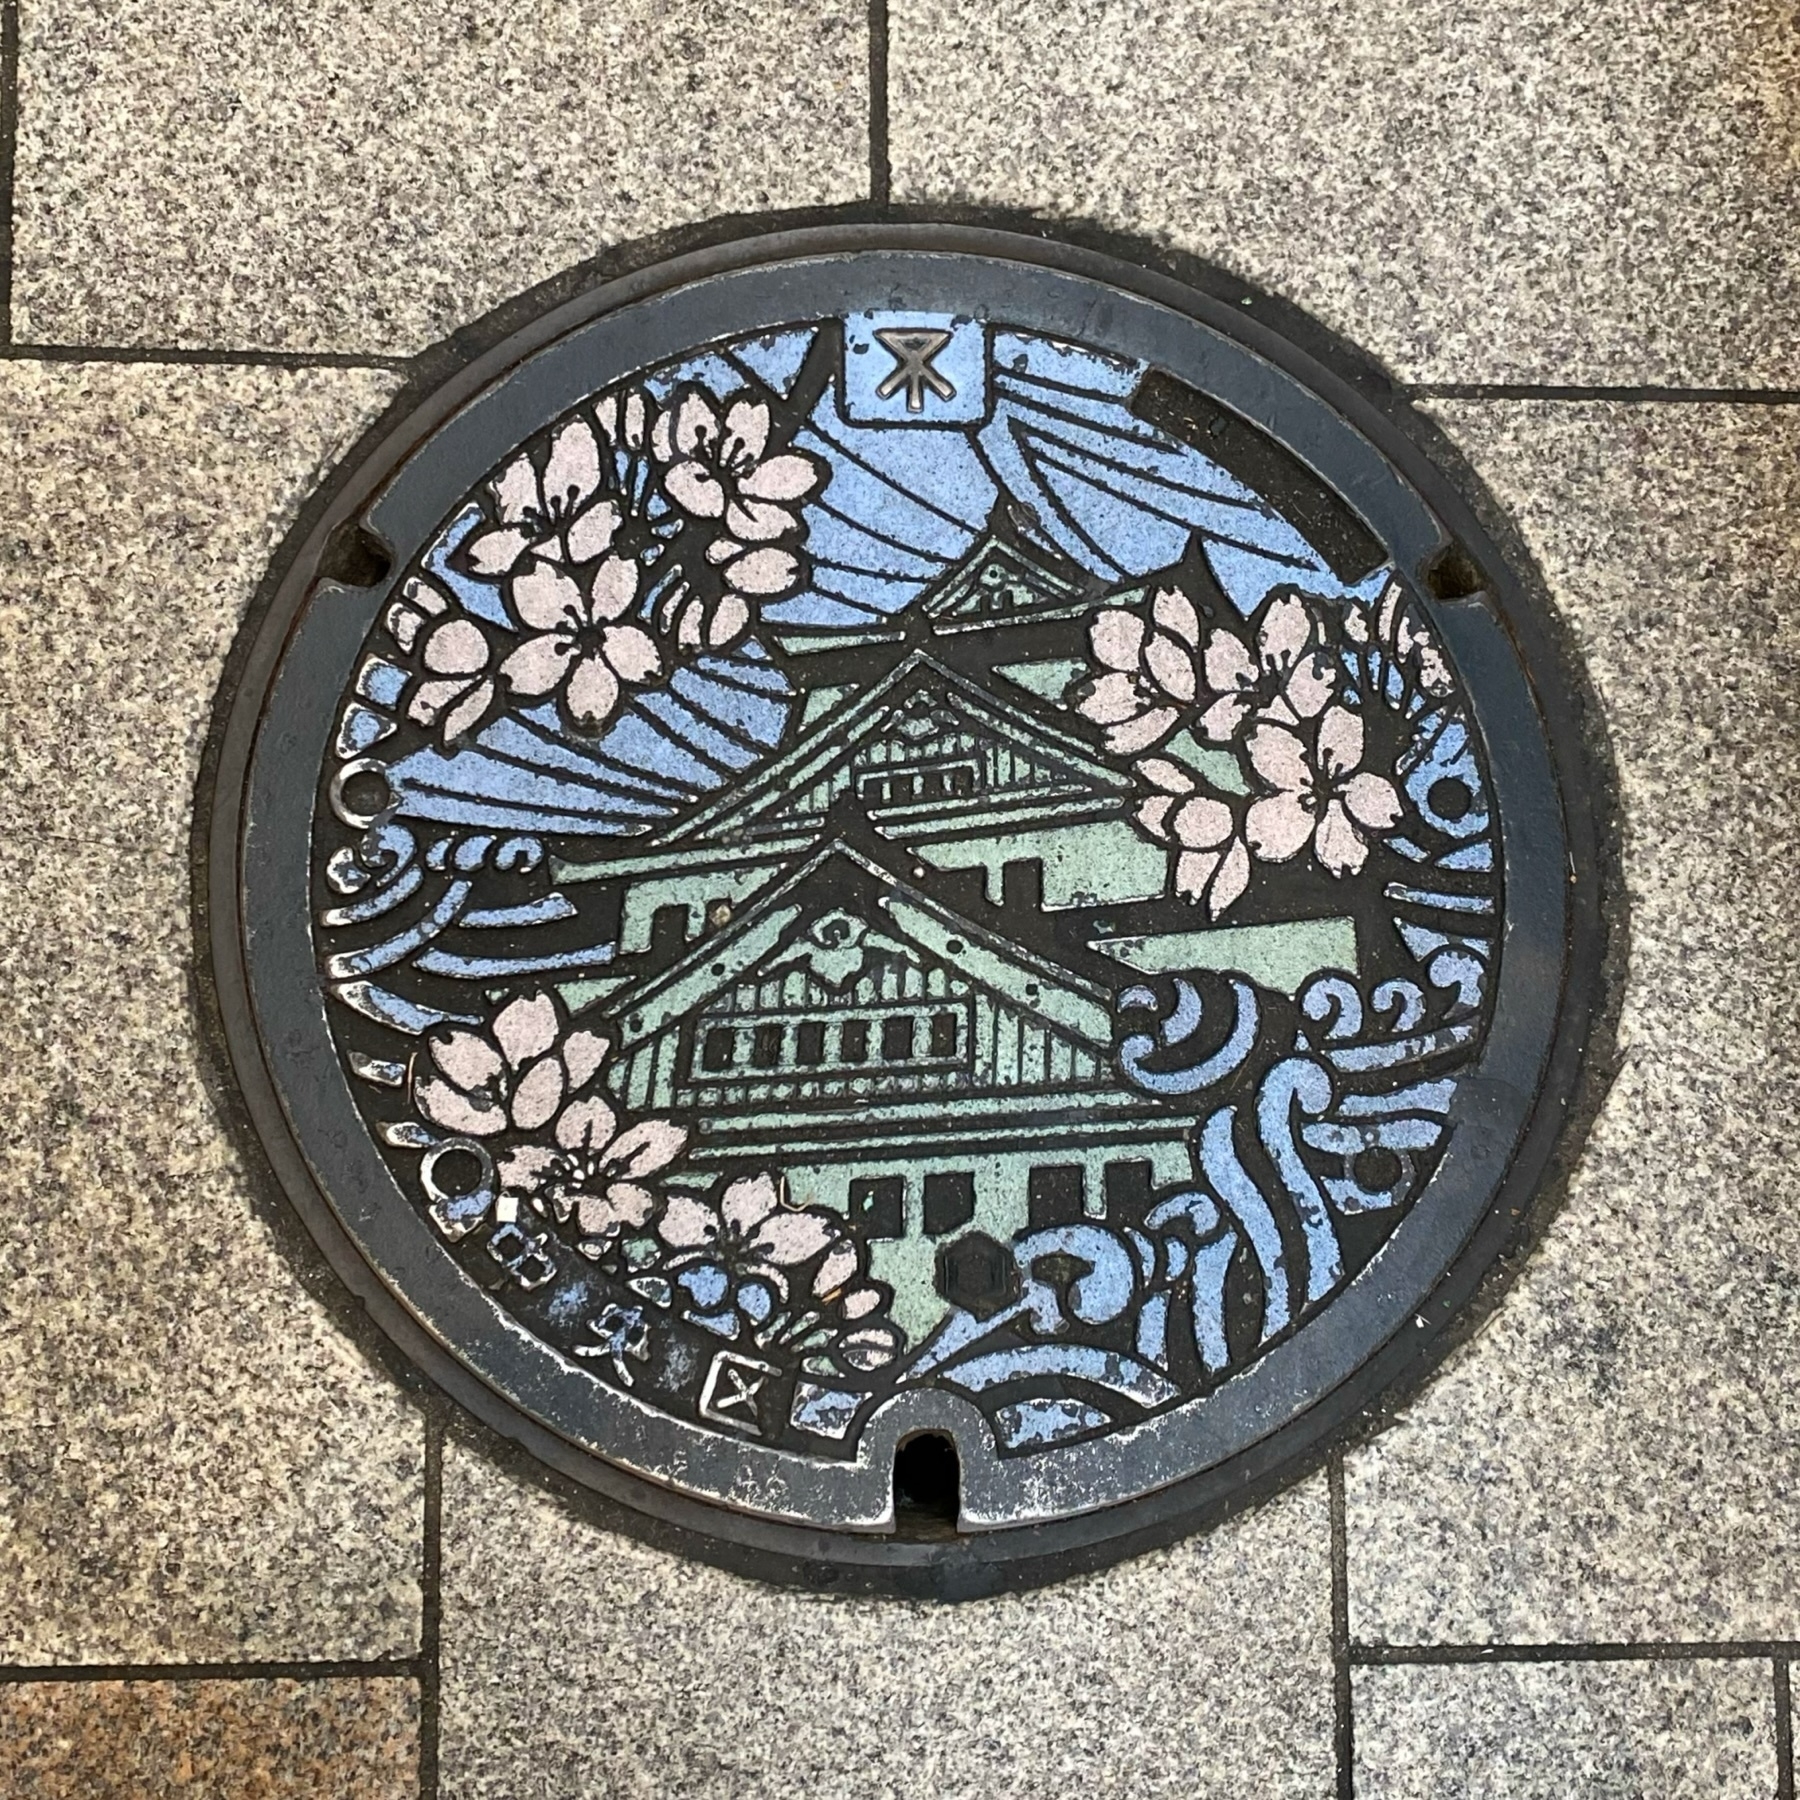 Decorative manhole cover featuring a traditional building, cherry blossoms, and stylized clouds or waves, showcasing Japanese cultural motifs.